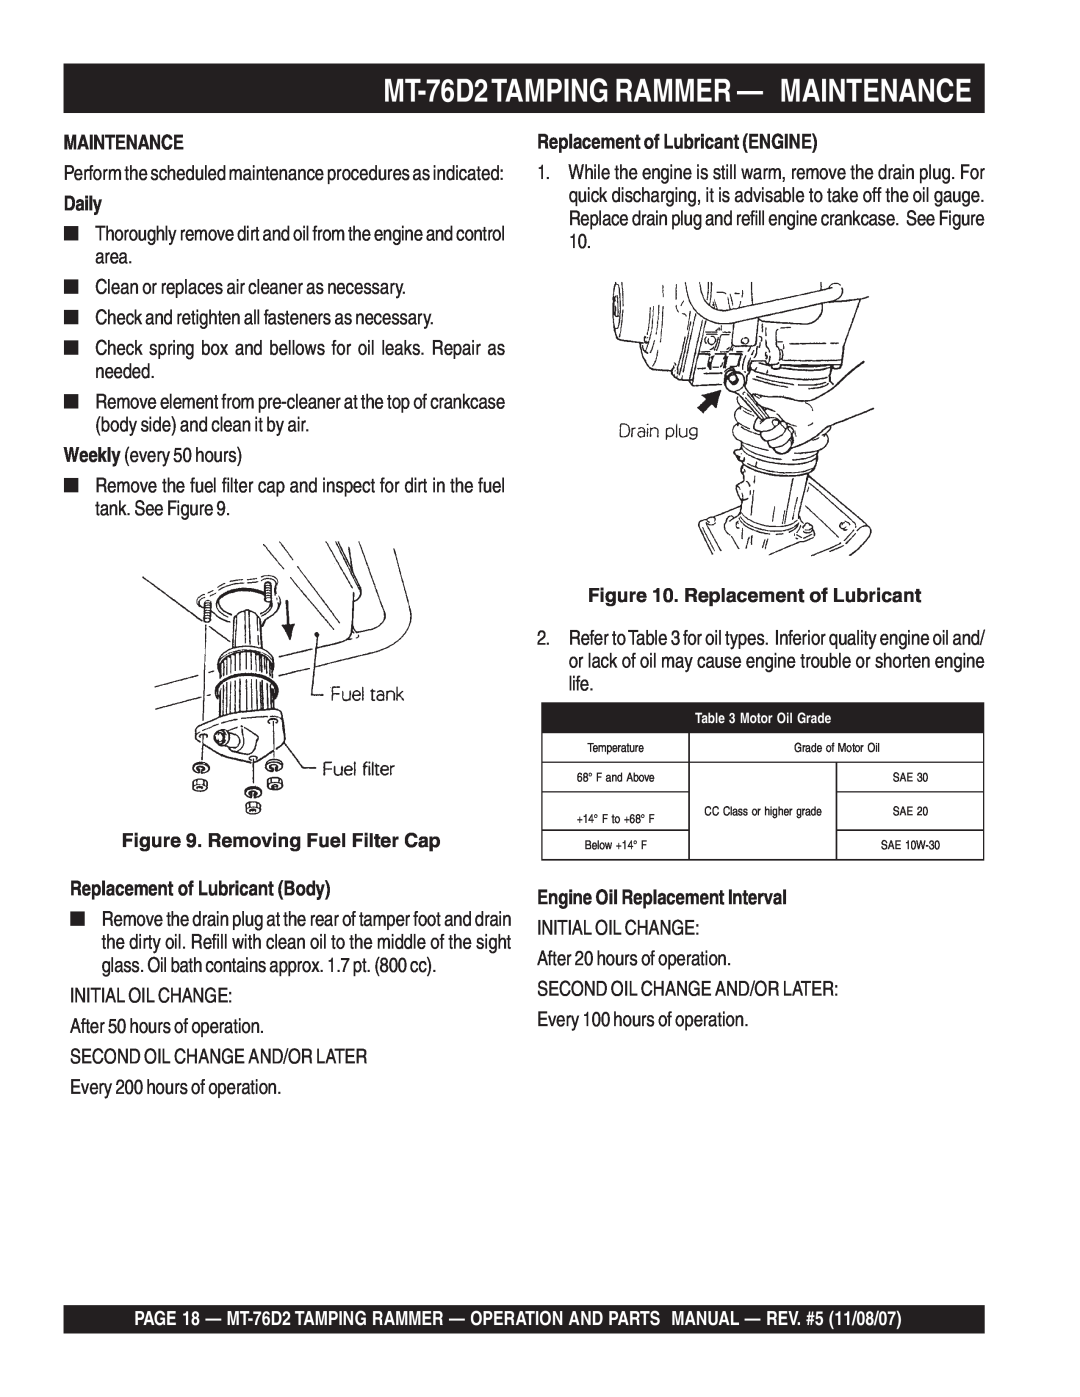 Multiquip manual MT-76D2TAMPING RAMMER - MAINTENANCE, Maintenance, Daily, Replacement of Lubricant ENGINE 